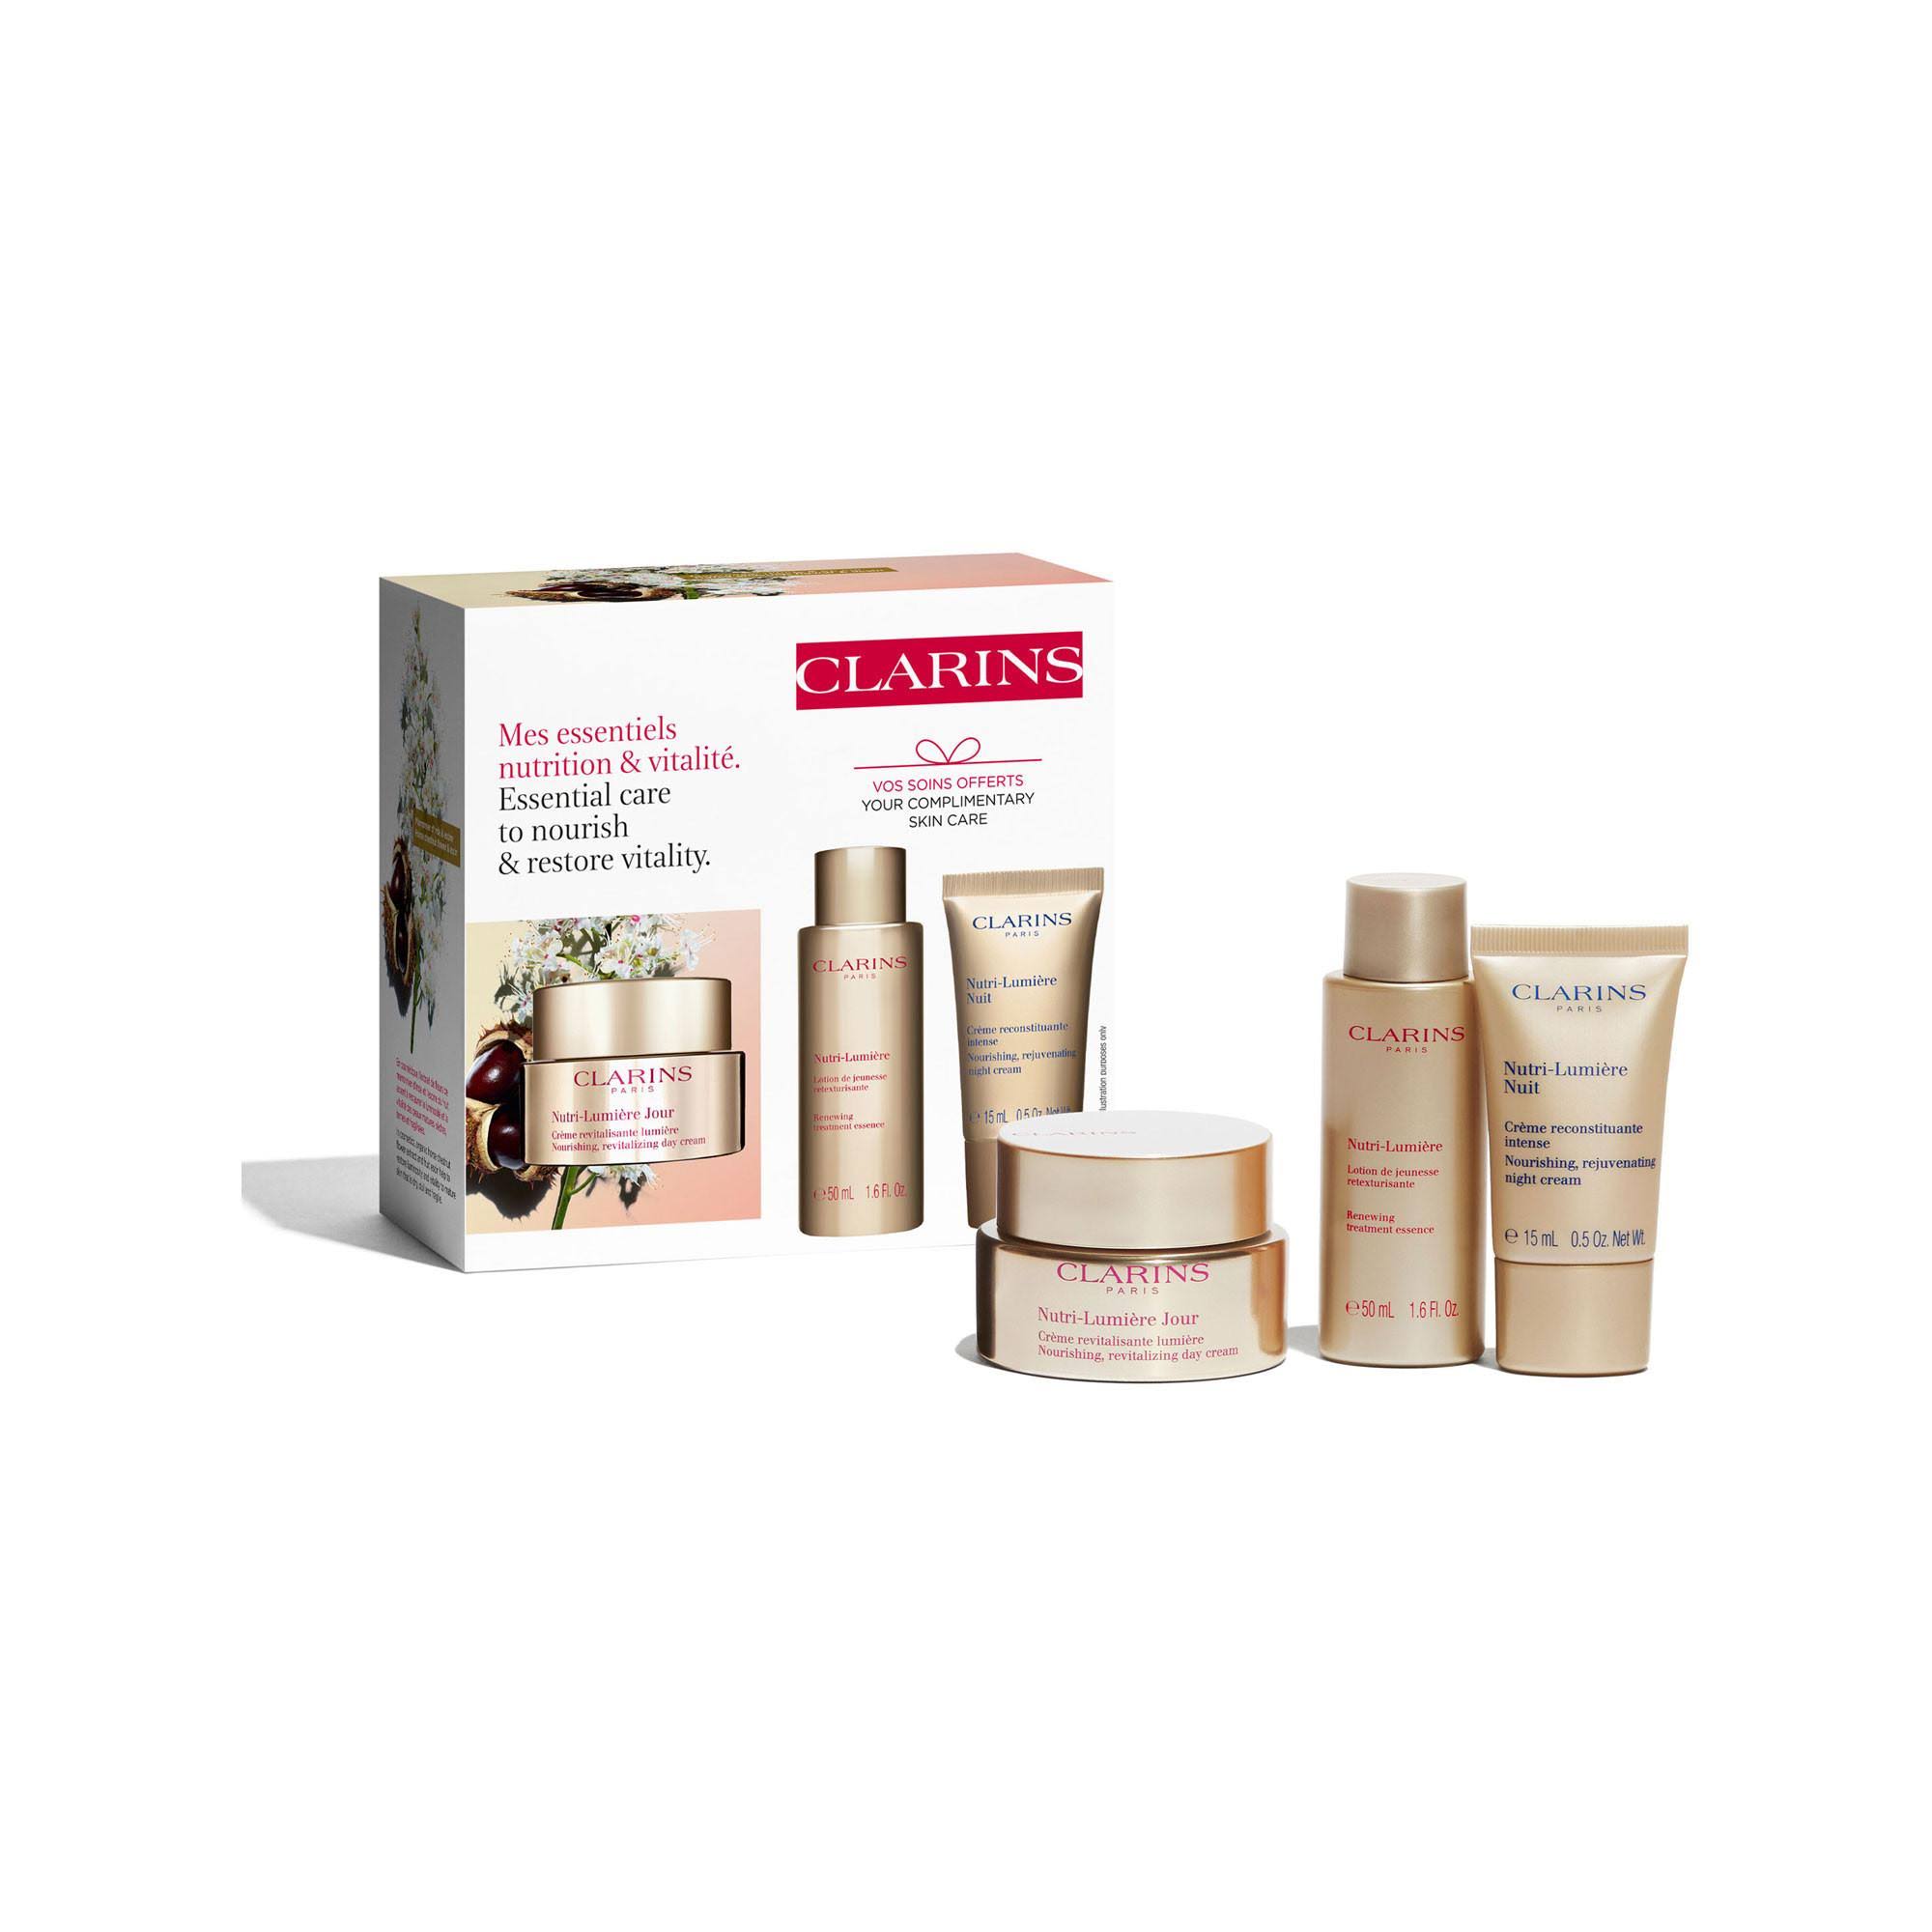 Clarins Nutri Lumiere Value Pack